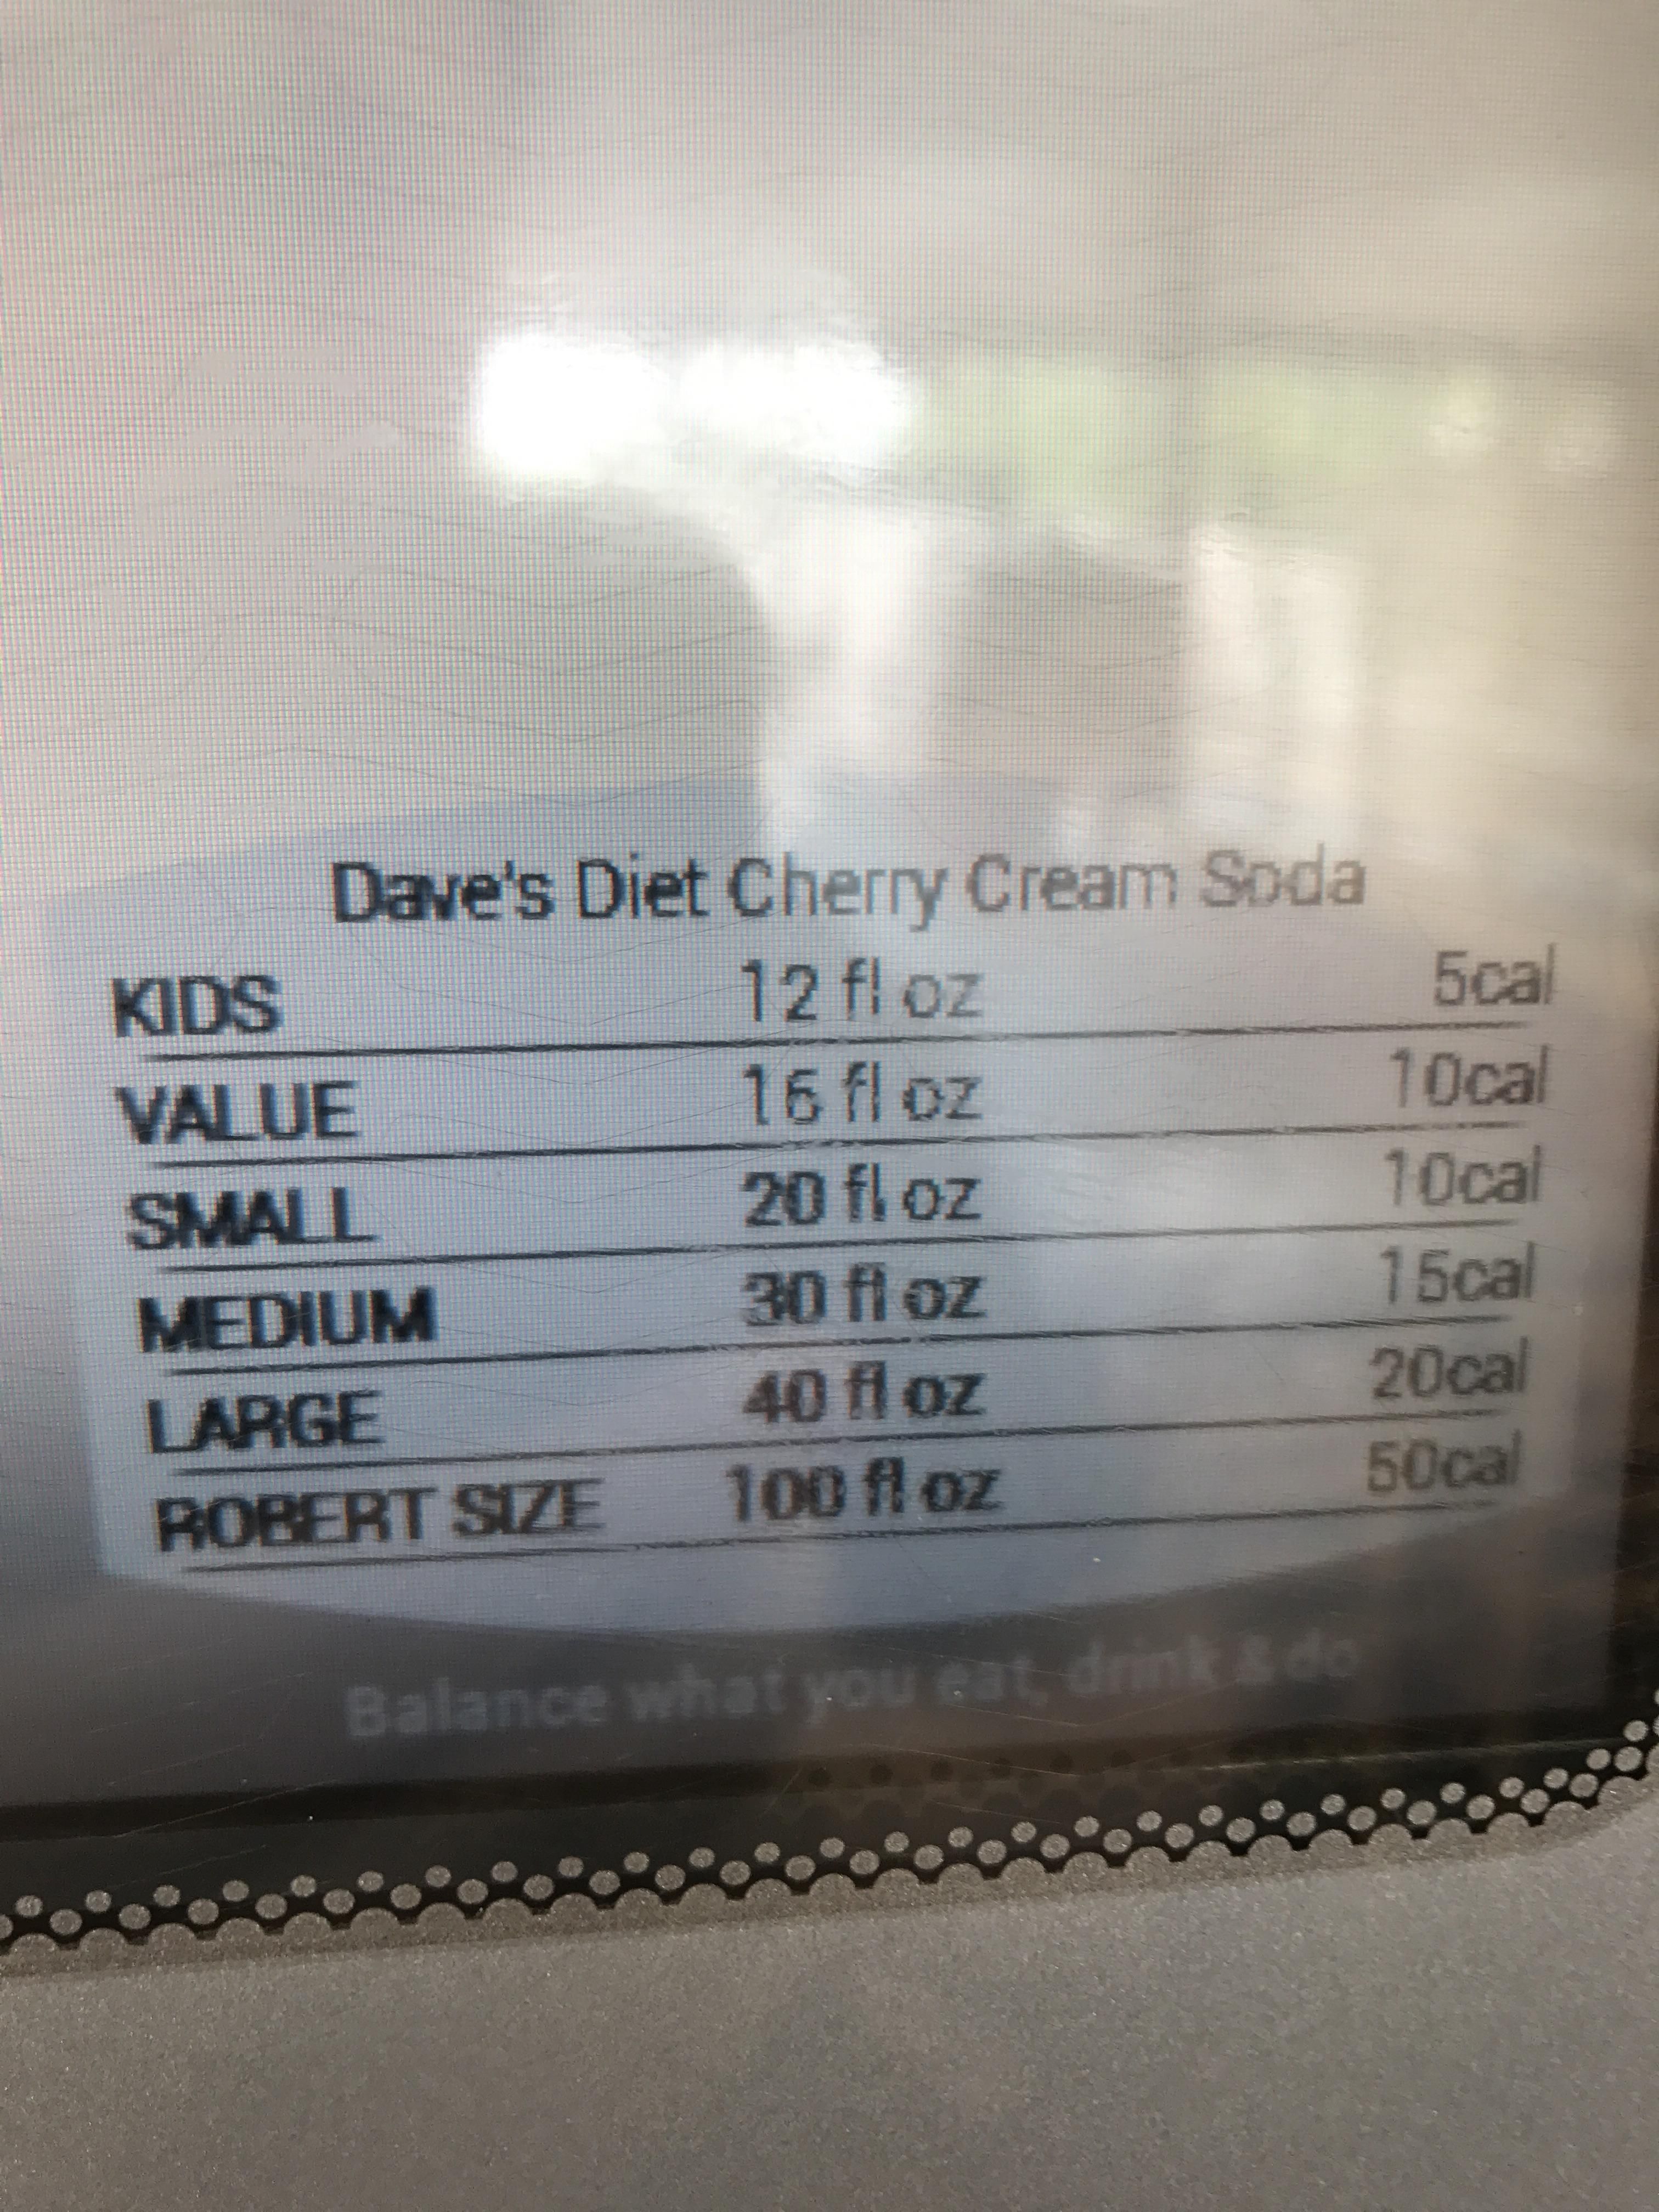 Who is Robert and why does he have his own soda size at my local Wendy's?